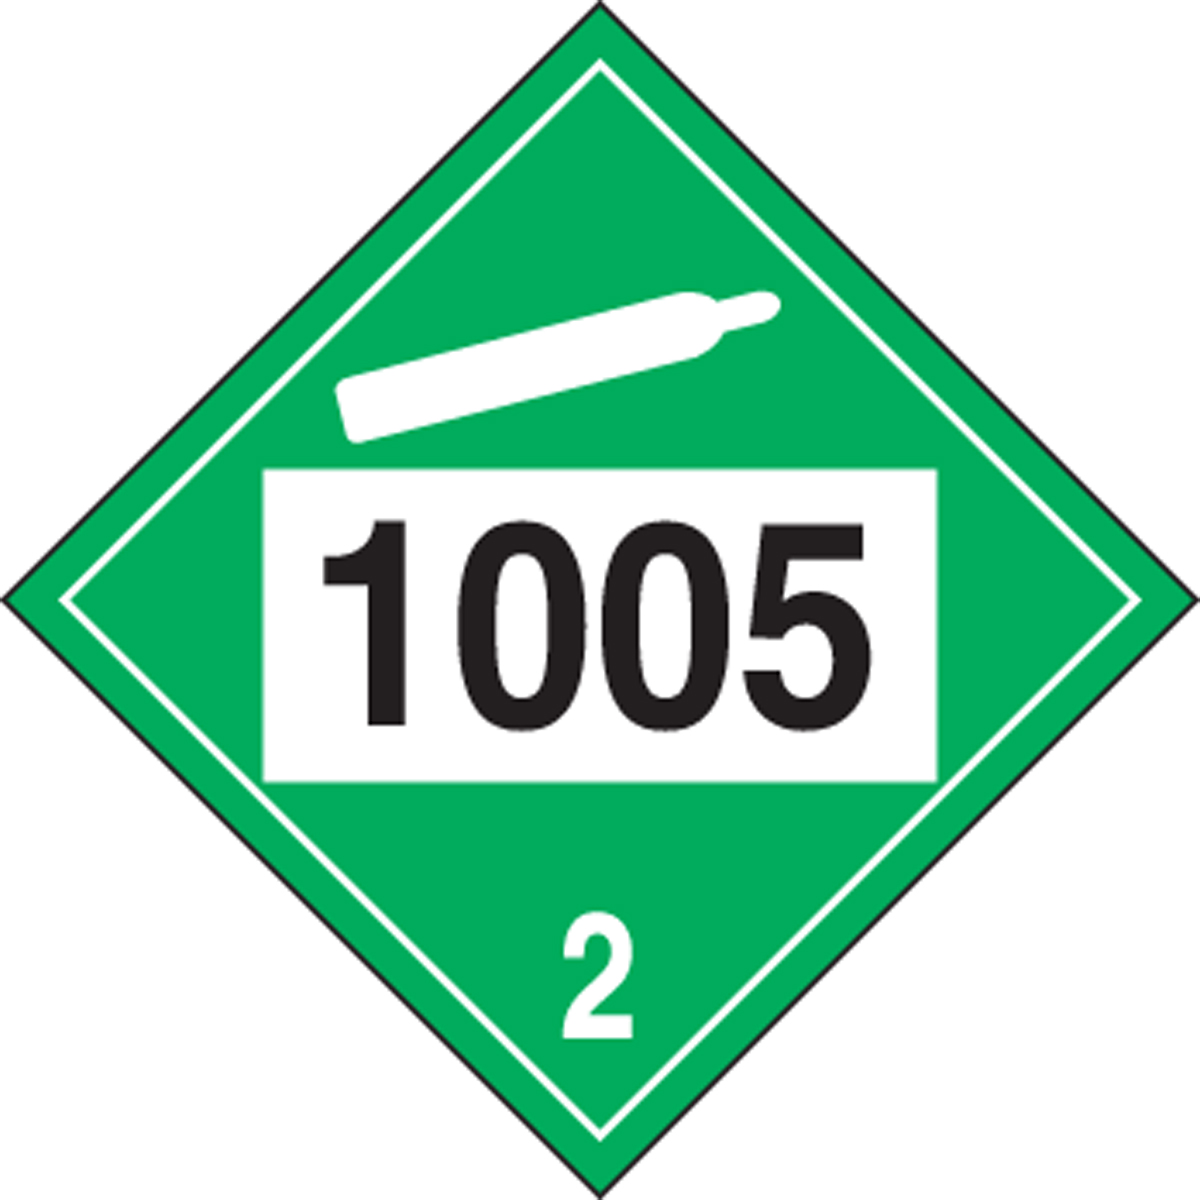 1005 (AMMONIA, ANHYDROUS, LIQUEFIED) (W/ GRAPHIC)